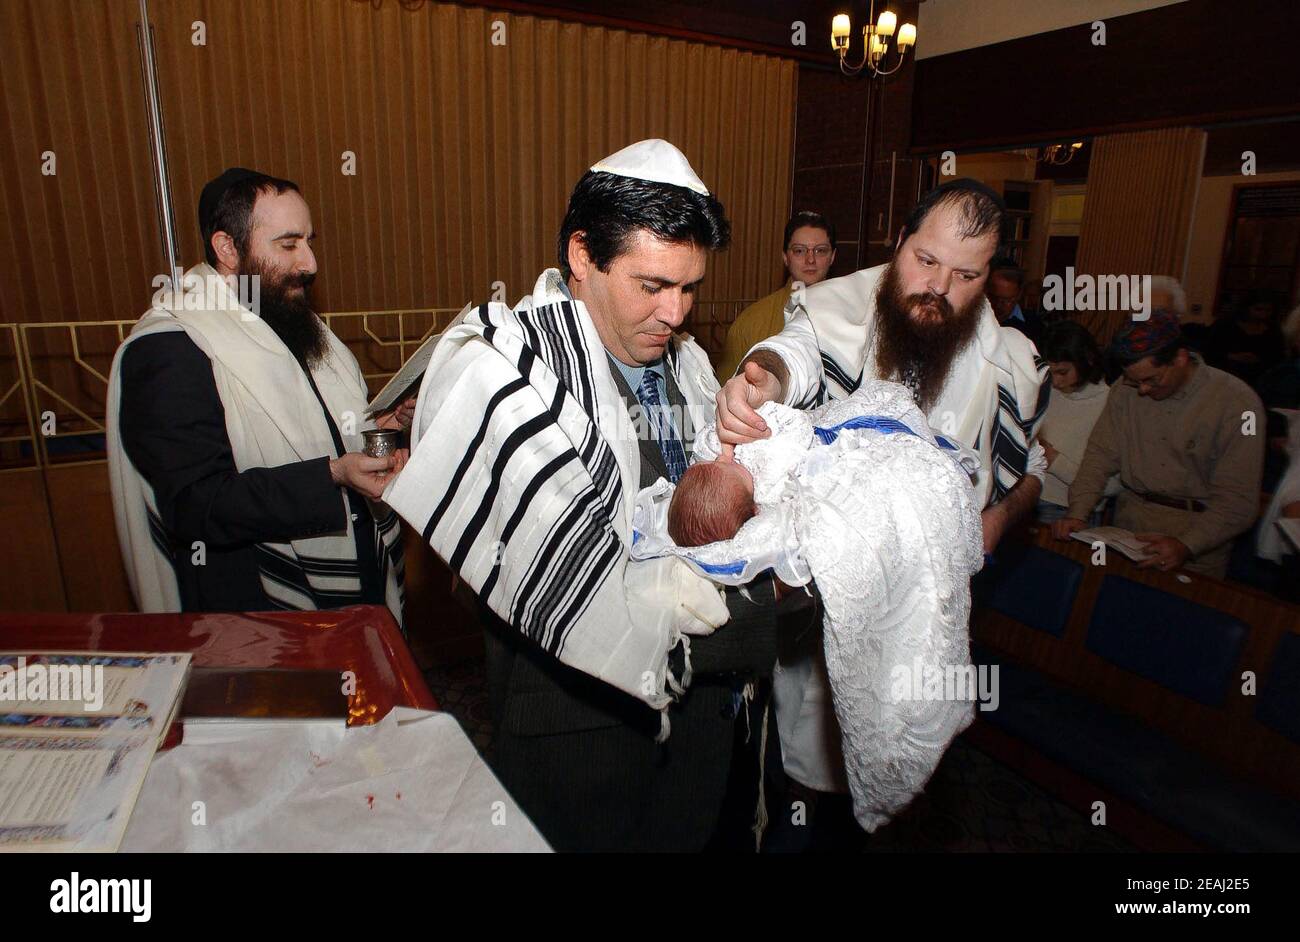 A Brit Milah ceremony takes place on the bimah of the synagogue in the Solihull, West Midlands, as the Mohel gives the traditional blessings as he commences the circumcision watched by the rabbi and family members. Stock Photo